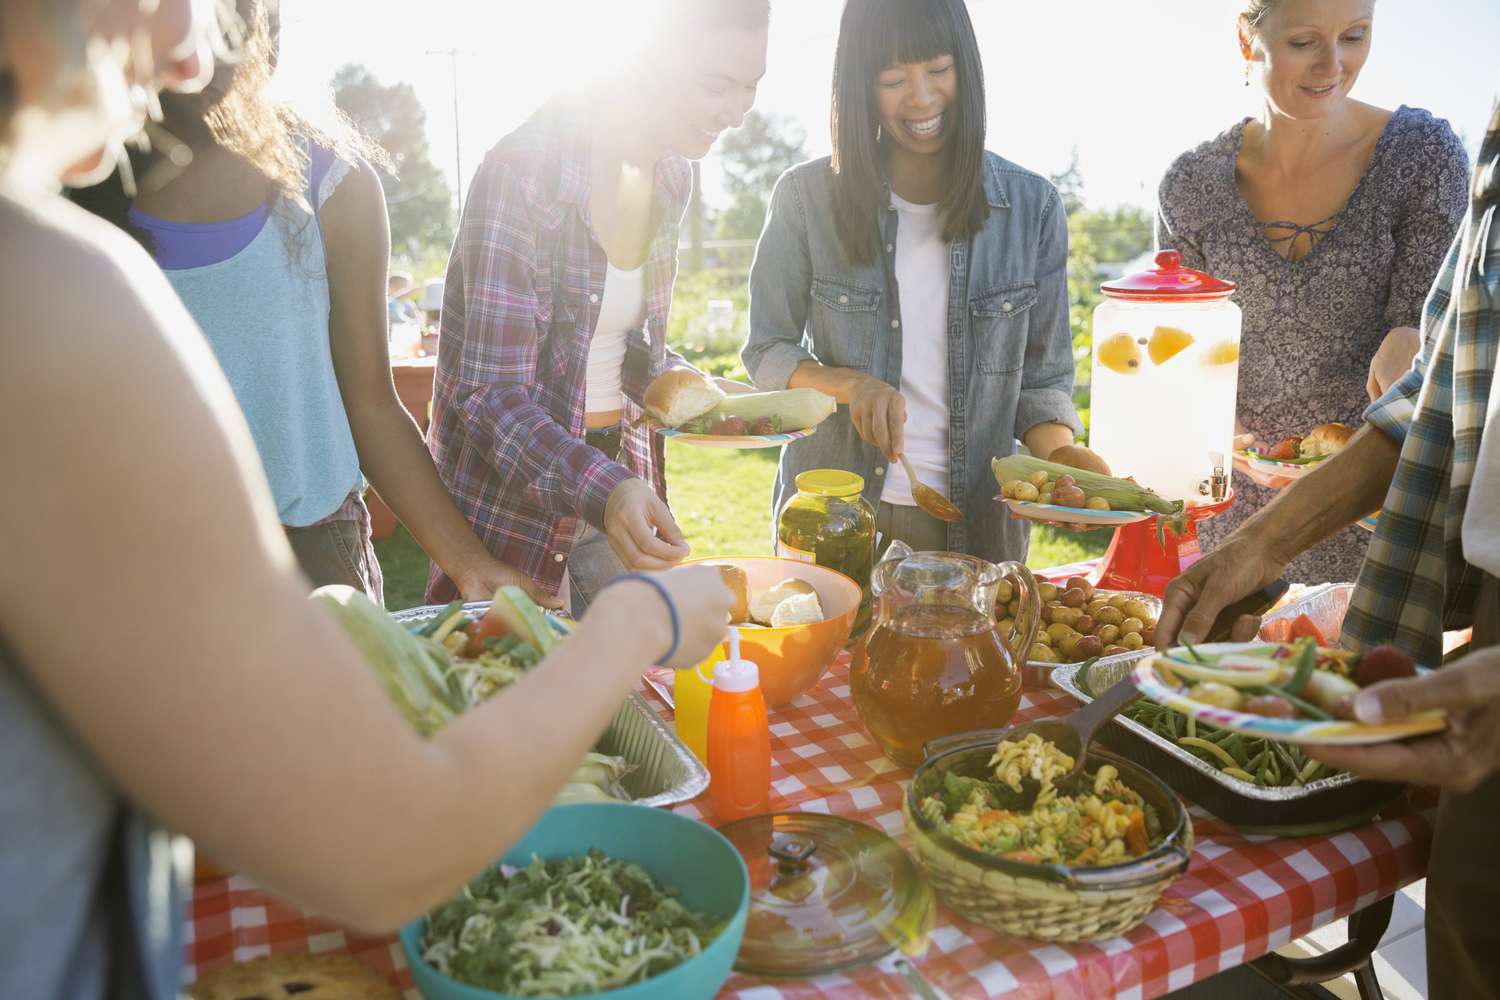 Smiling neighbors around potluck table in sunny park